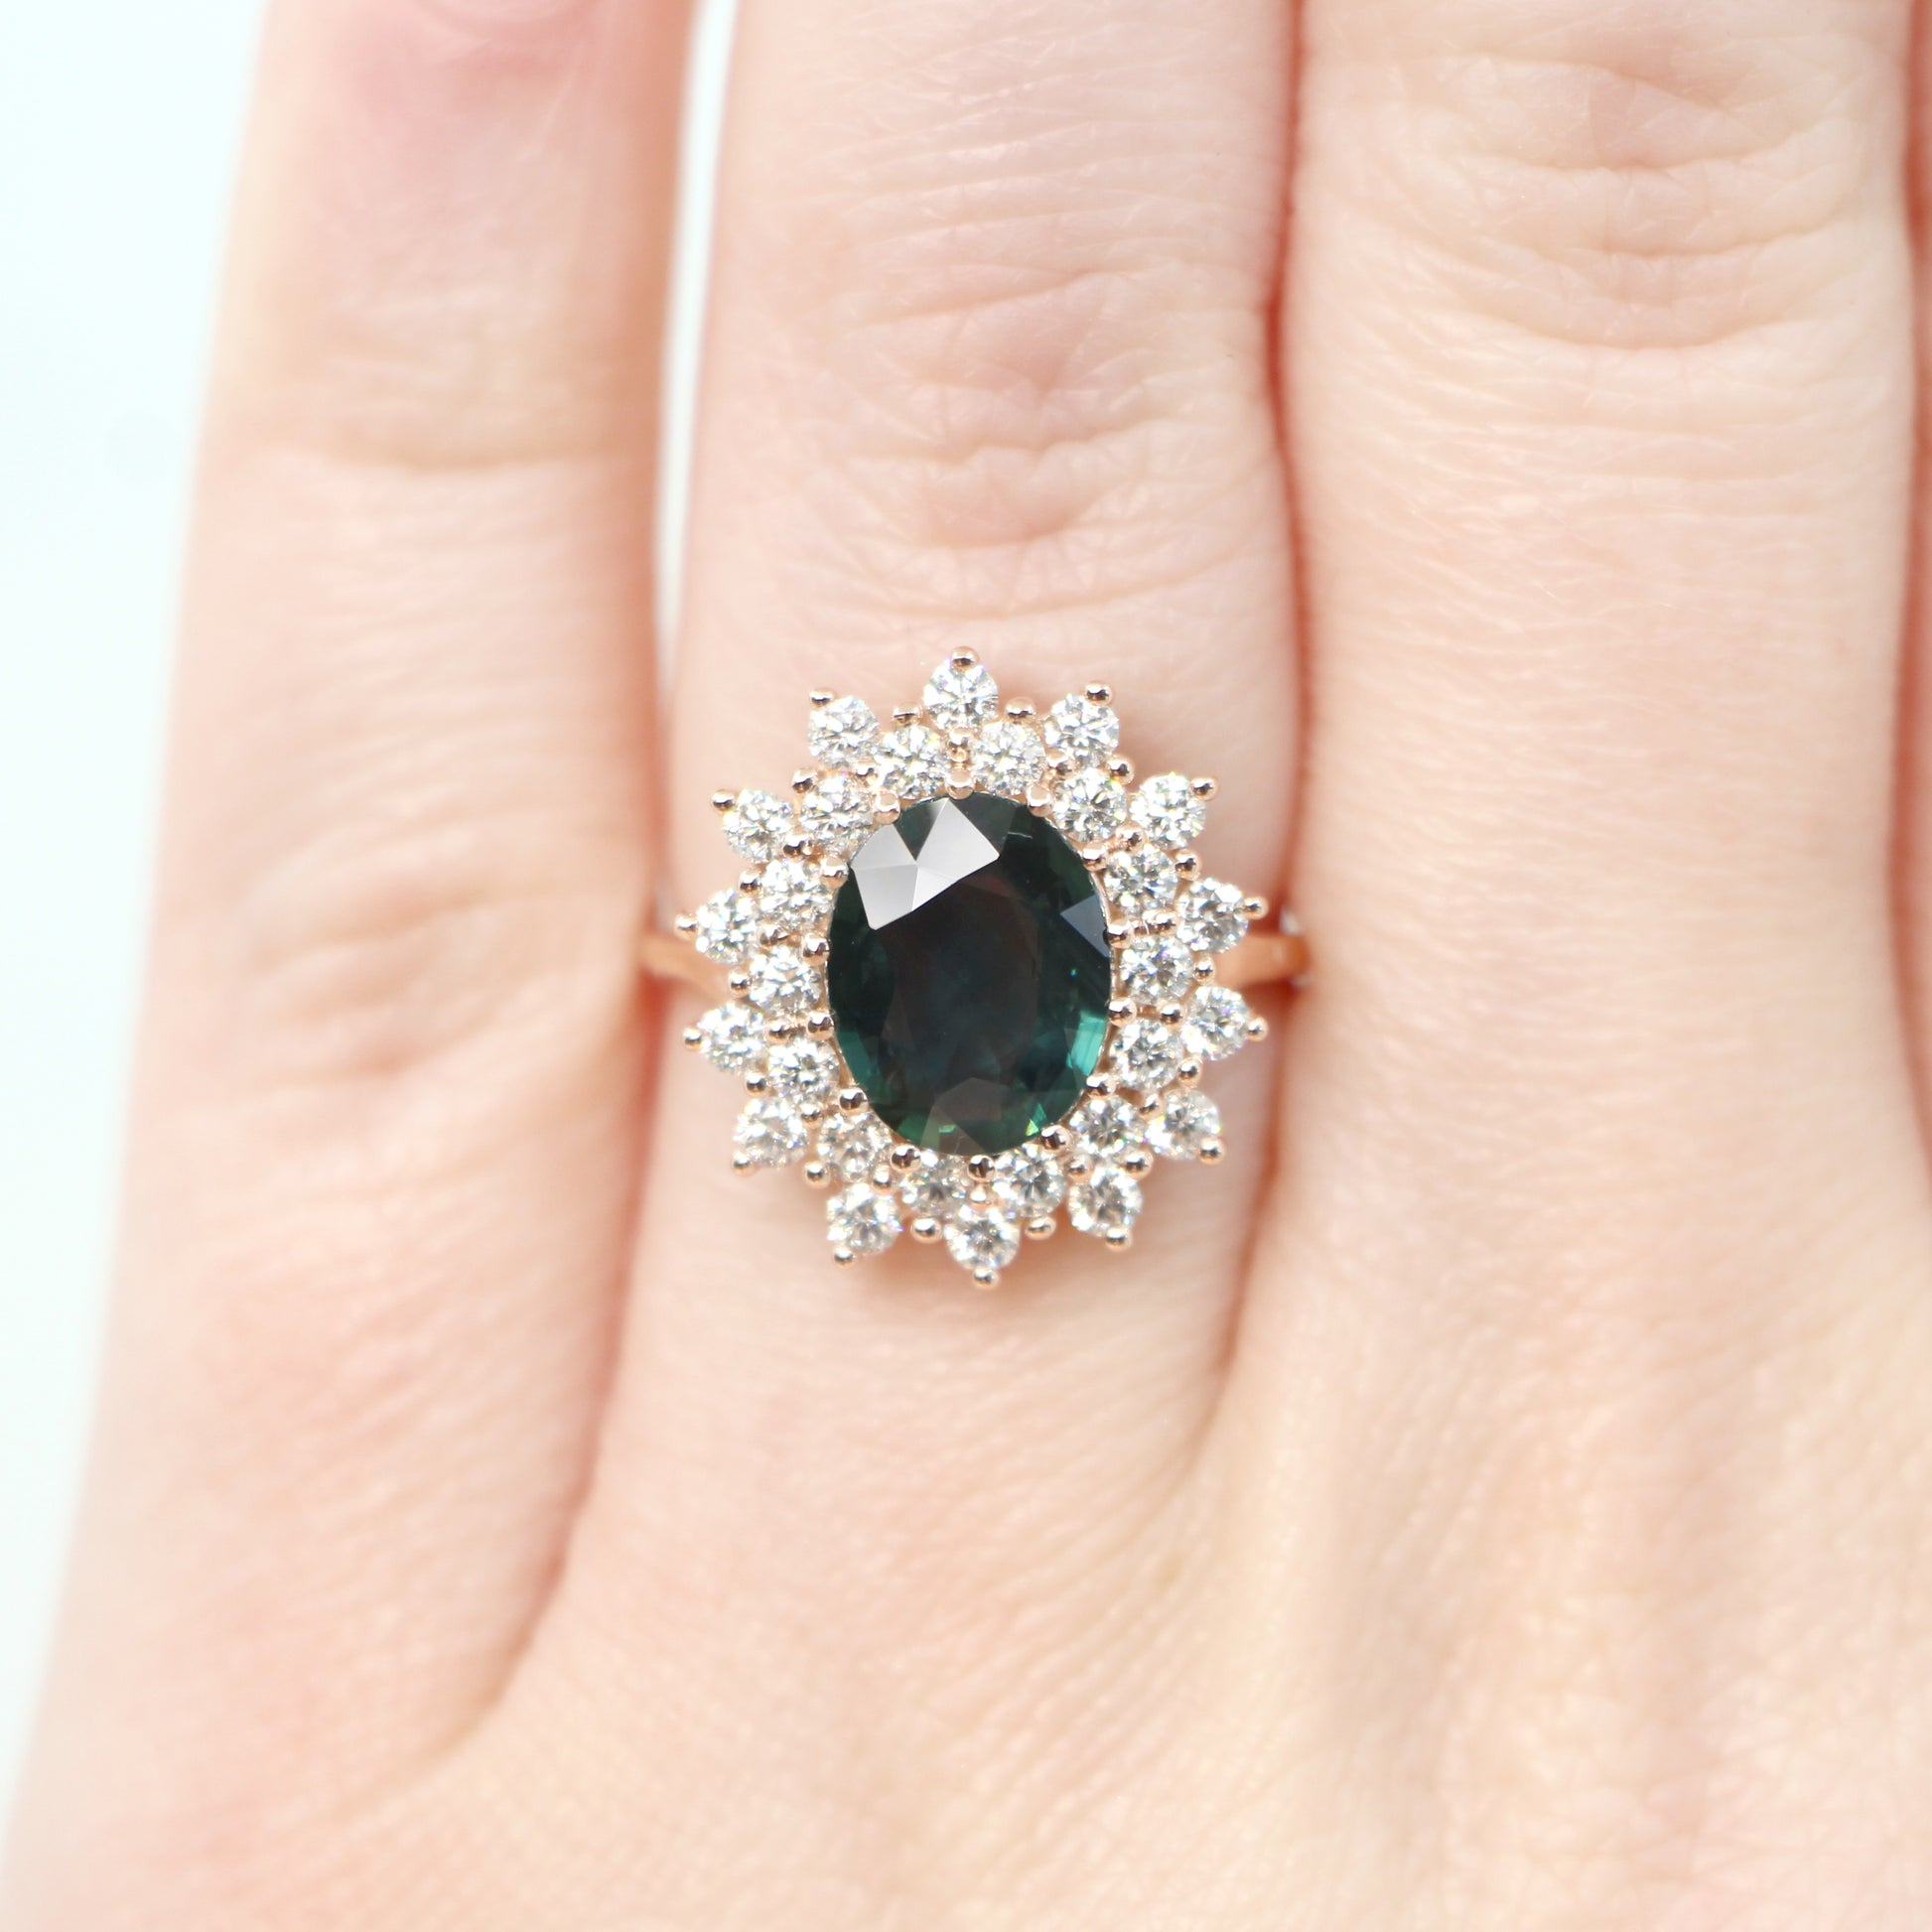 Catherine Ring with a 2.40 Carat Teal Oval Sapphire and White Accent Diamonds in 14k Rose Gold - Ready to Size and Ship - Midwinter Co. Alternative Bridal Rings and Modern Fine Jewelry